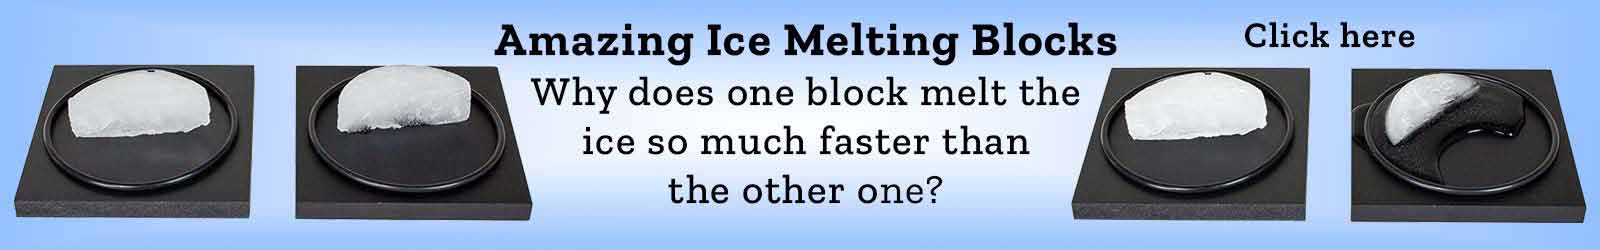 Amazing Ice Melting Blocks Why does one block melt the ice so much faster than the other one?